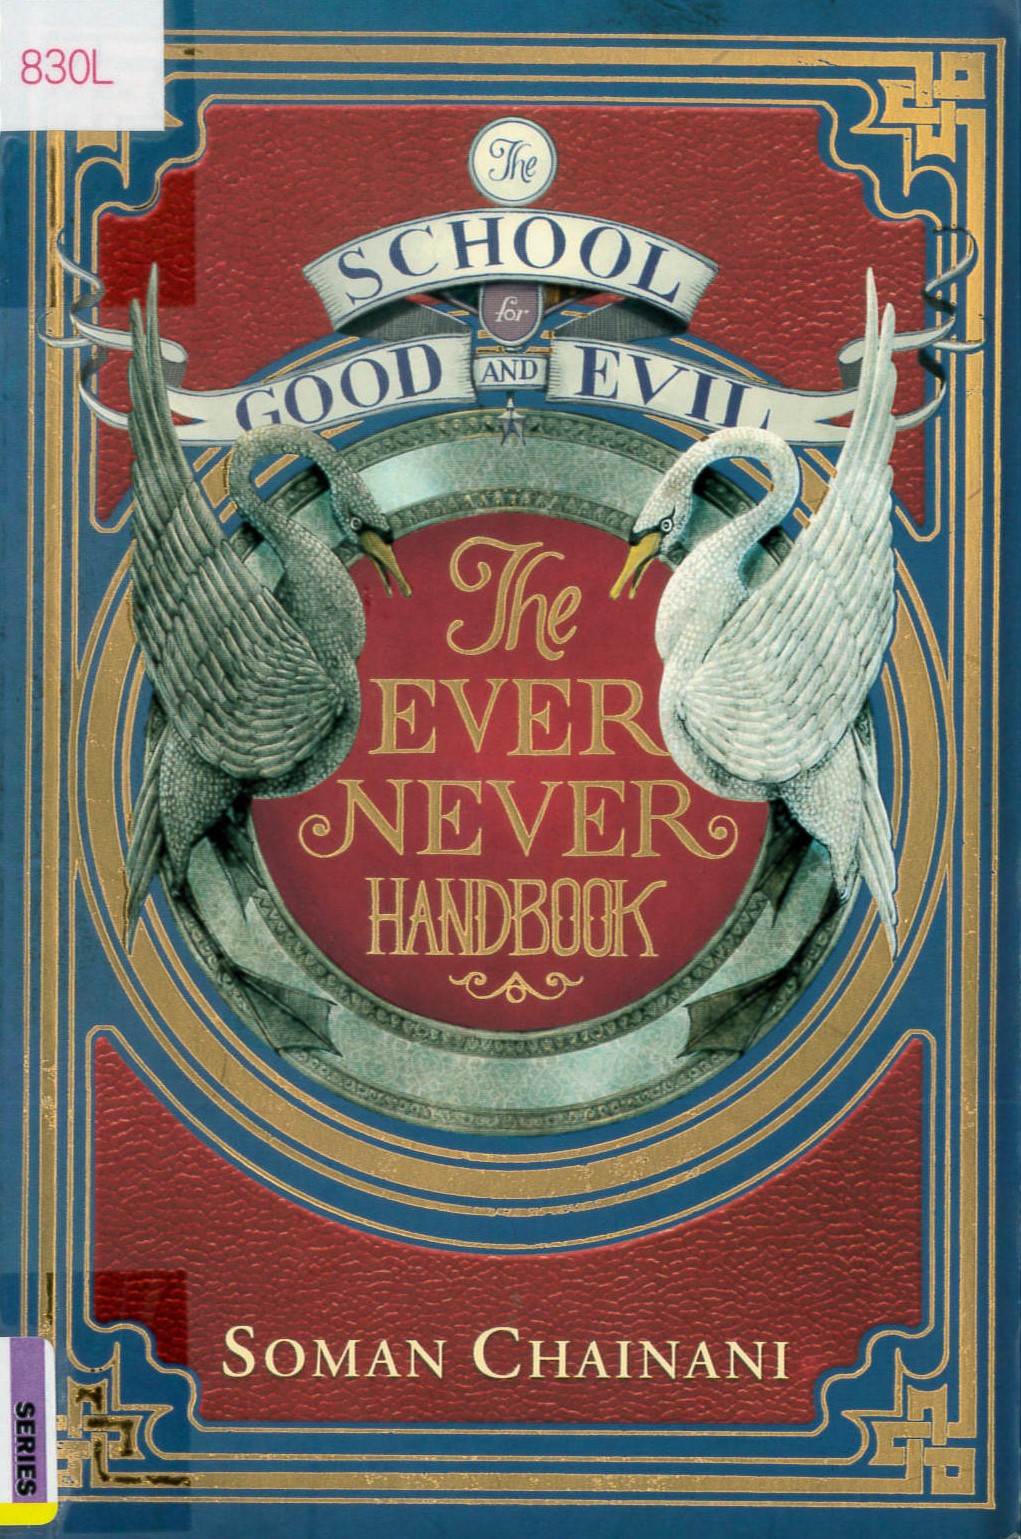 The School for Good and Evil : the ever never handbook /